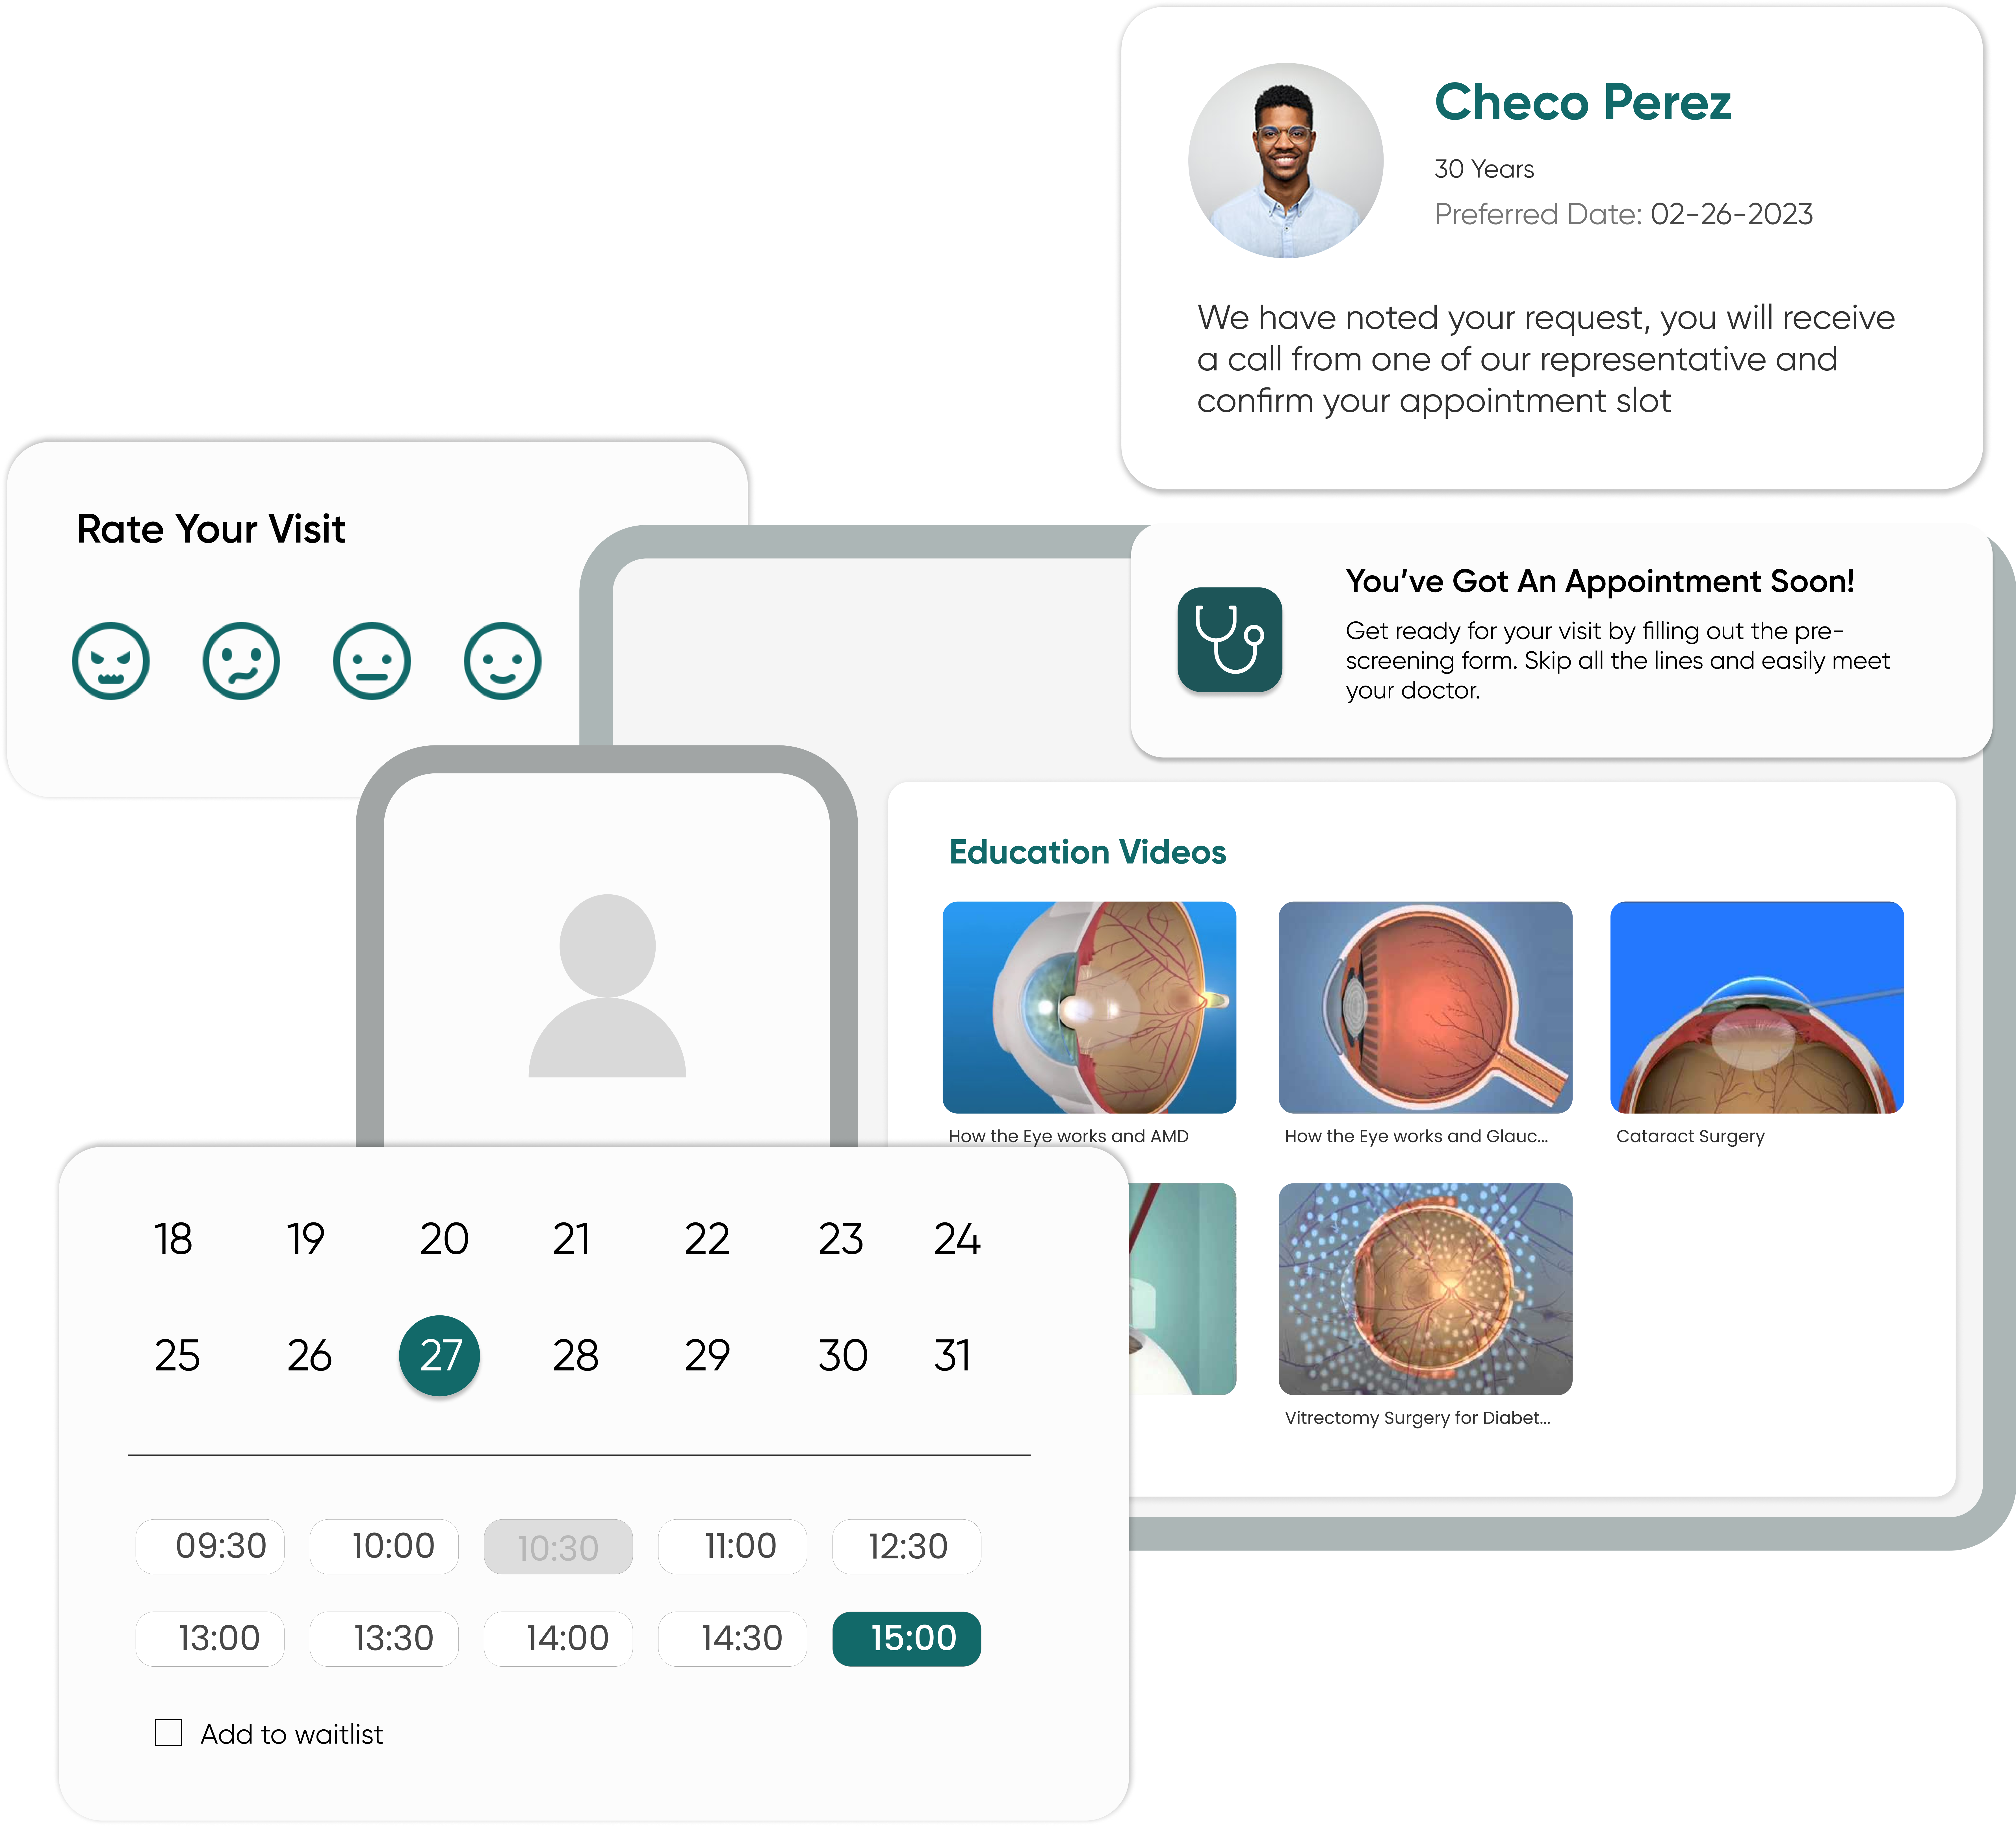 Personalized Patient Engagement: Extensive solutions to simplify patient communication, provide modern experiences, educate patients, get valuable feedback, and more.